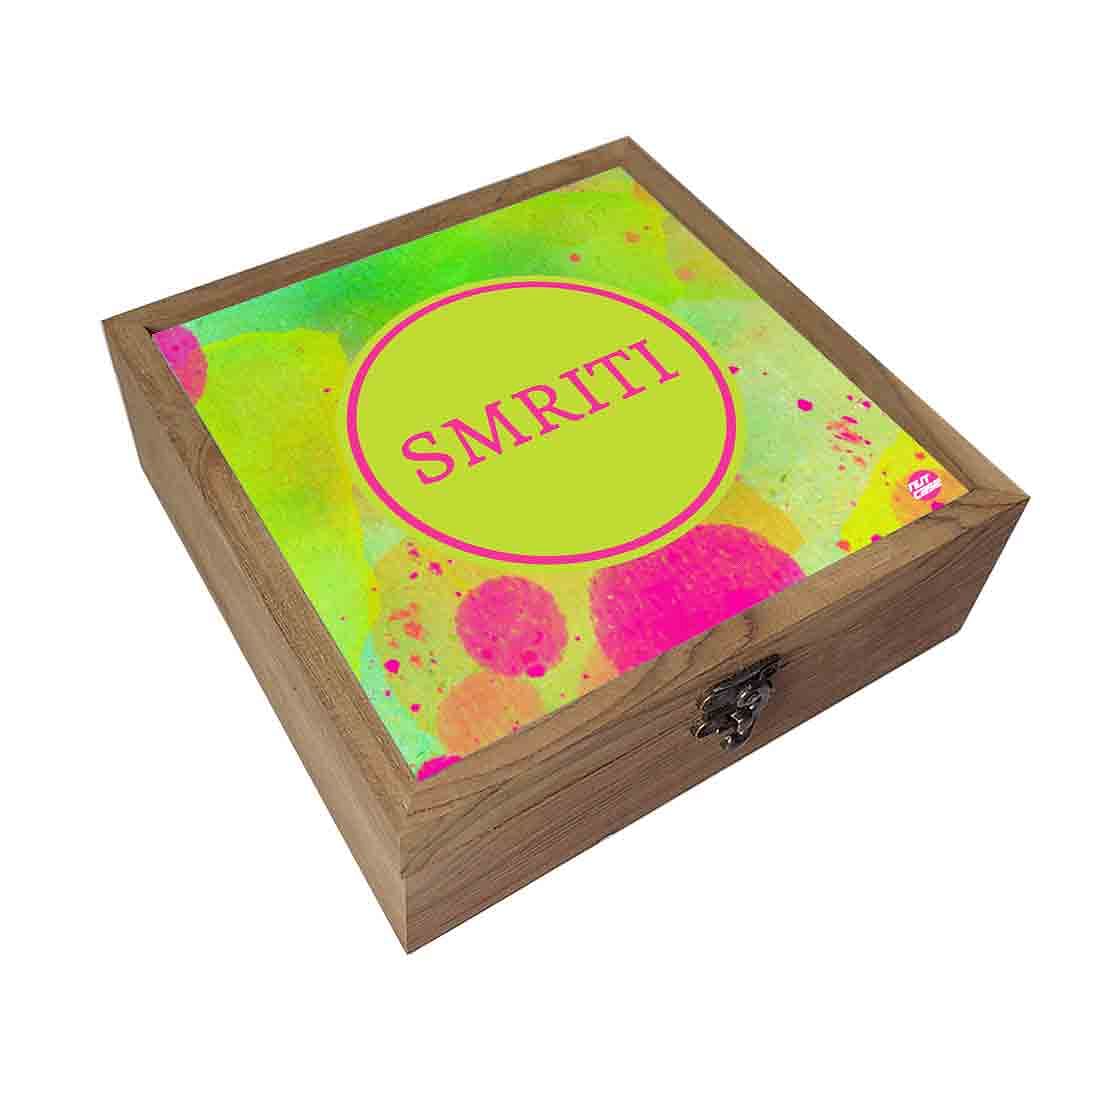 Customized Earring Box for Girls - Green Watercolor Nutcase